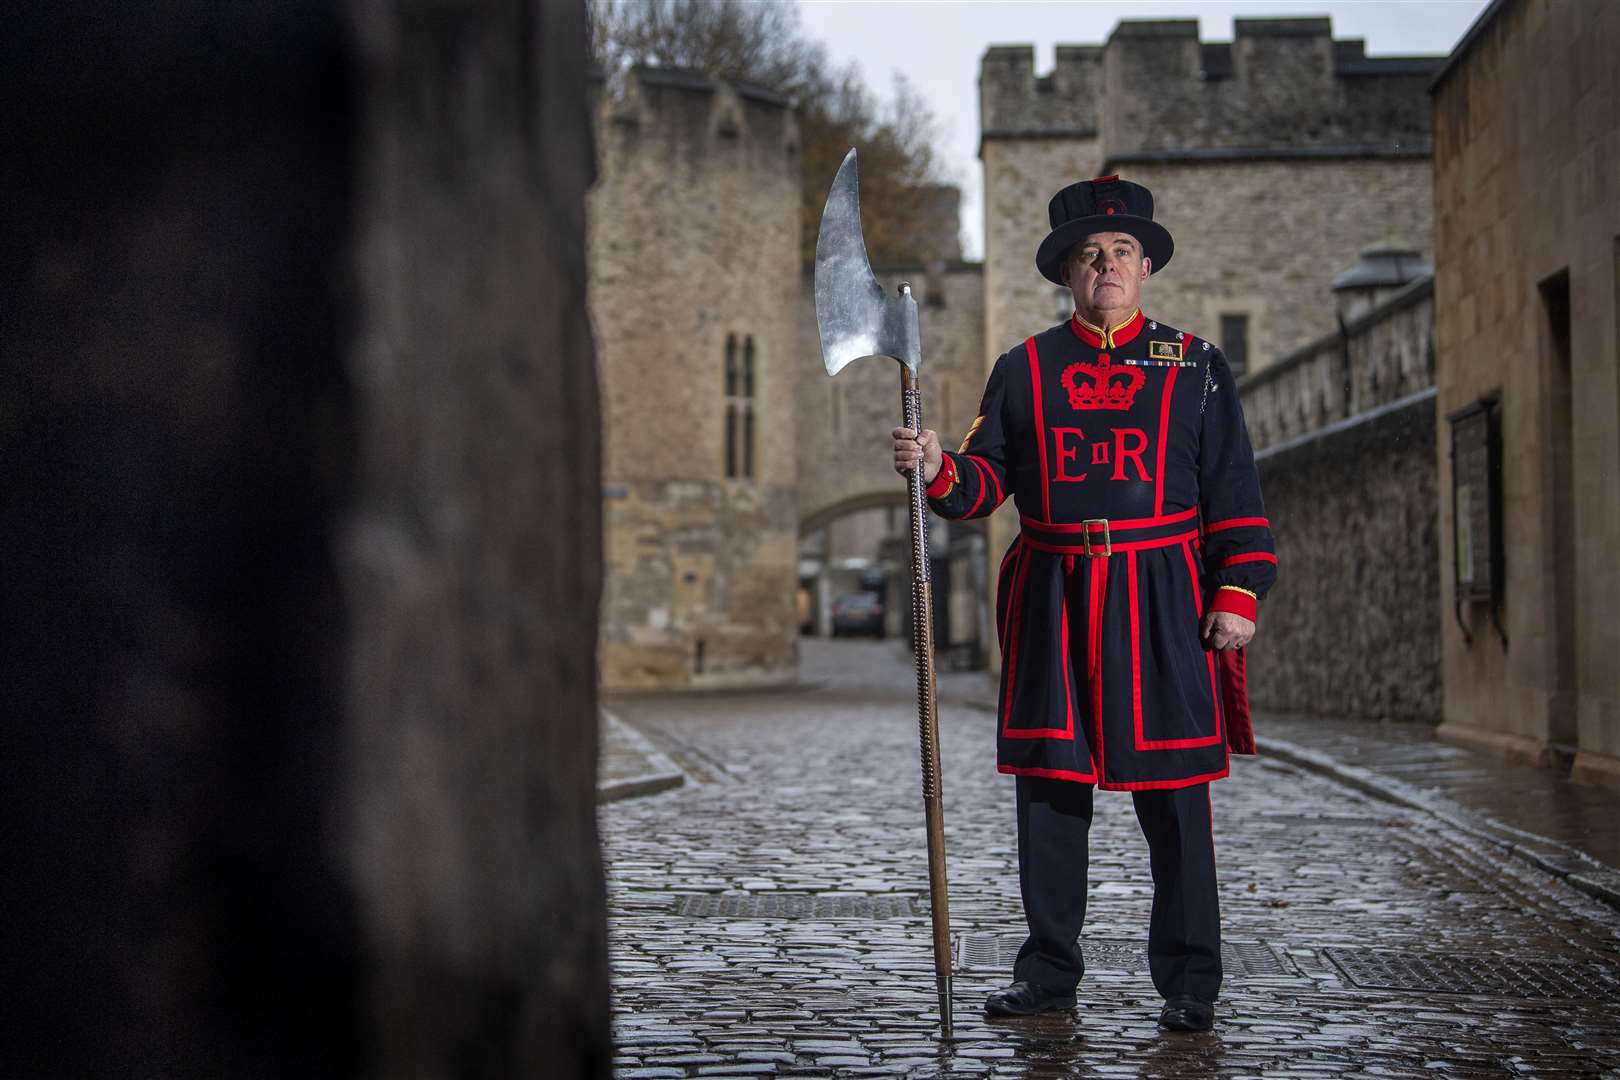 Serjeant Fuller, who applied to become a yeoman warder in 2011, will be among those welcoming visitors (Victoria Jones/PA)